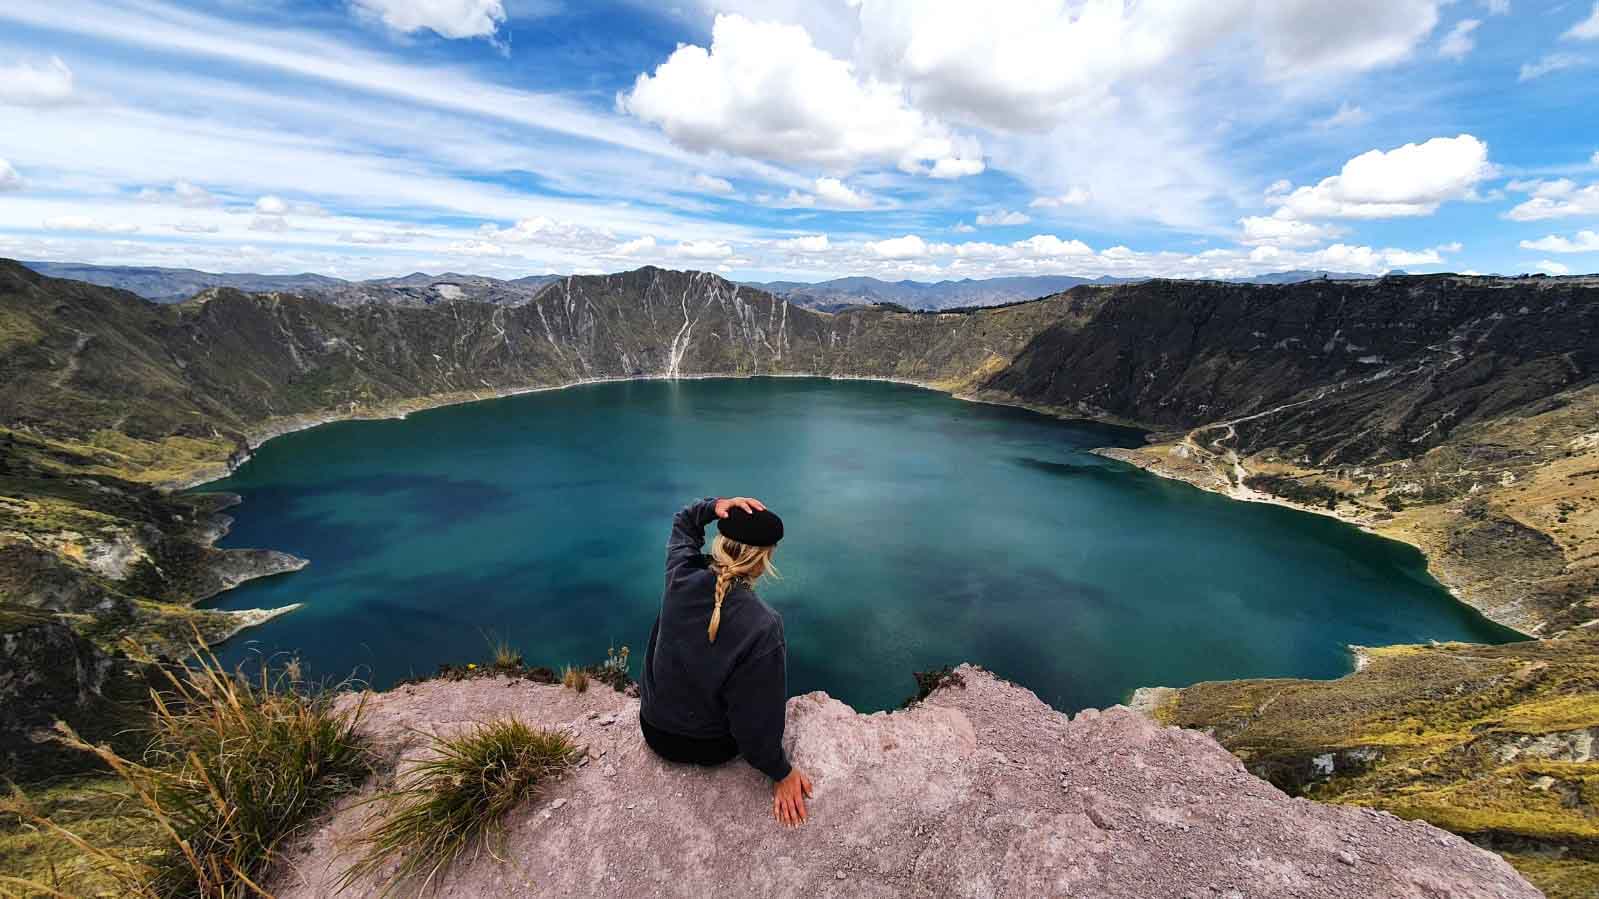  Ecuador | A complete hiking guide to the Quilotoa Lake Trail